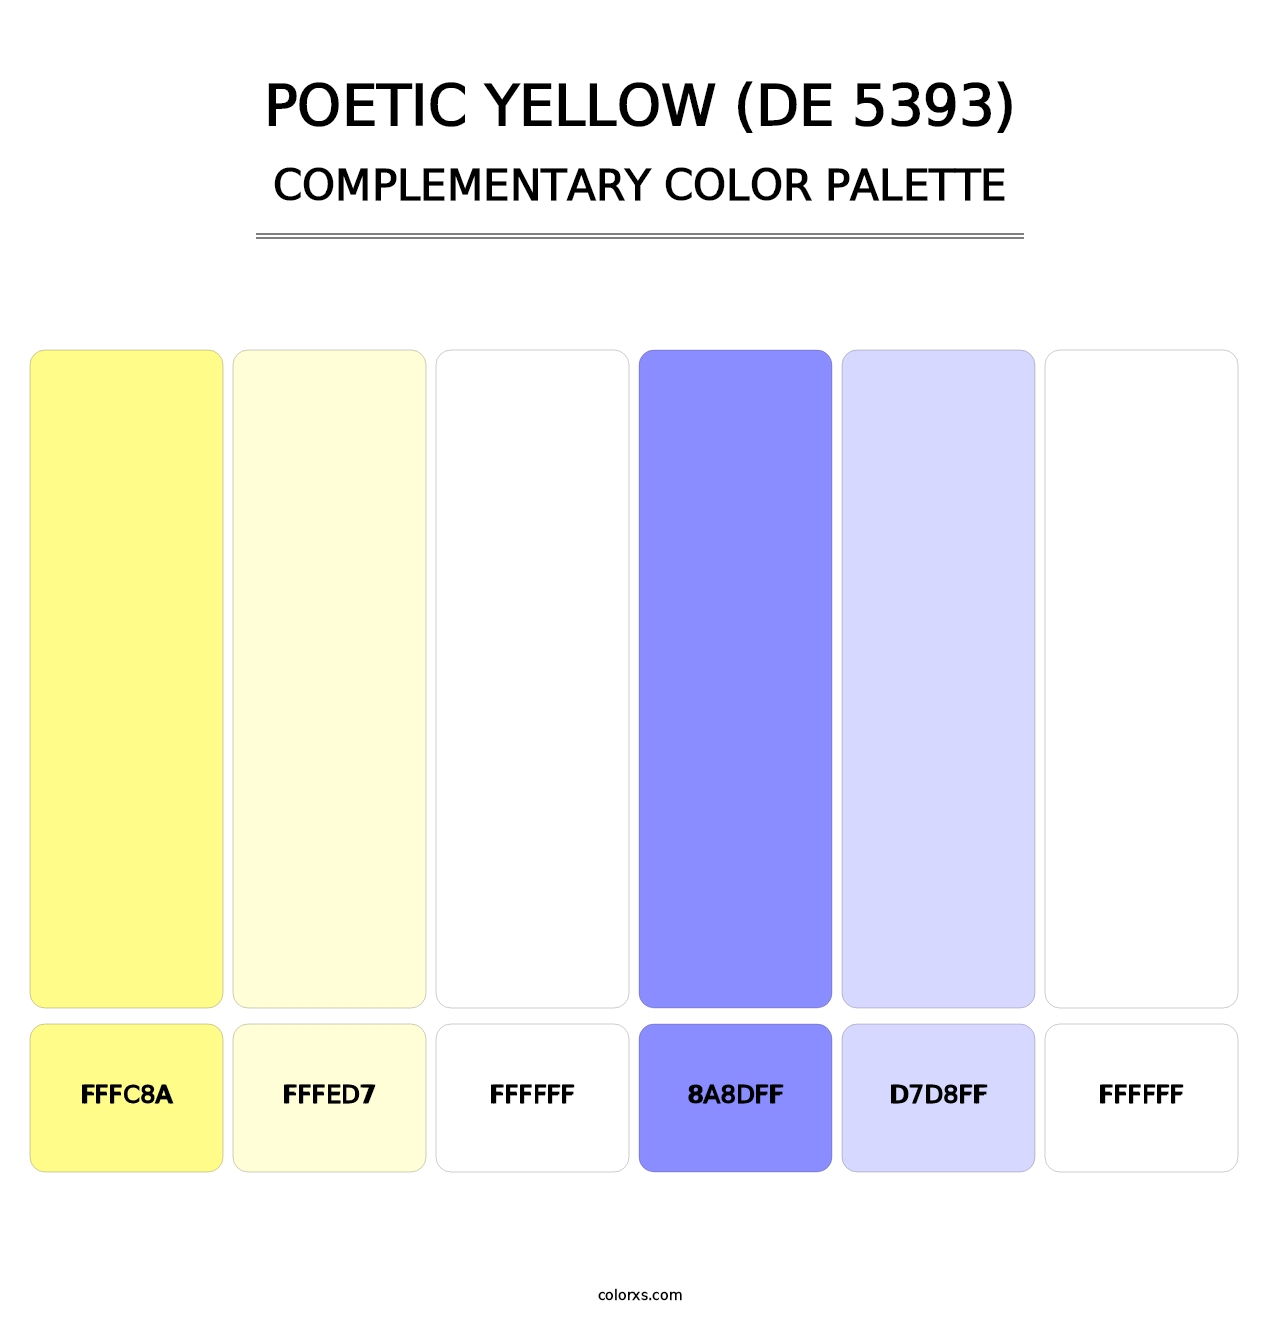 Poetic Yellow (DE 5393) - Complementary Color Palette